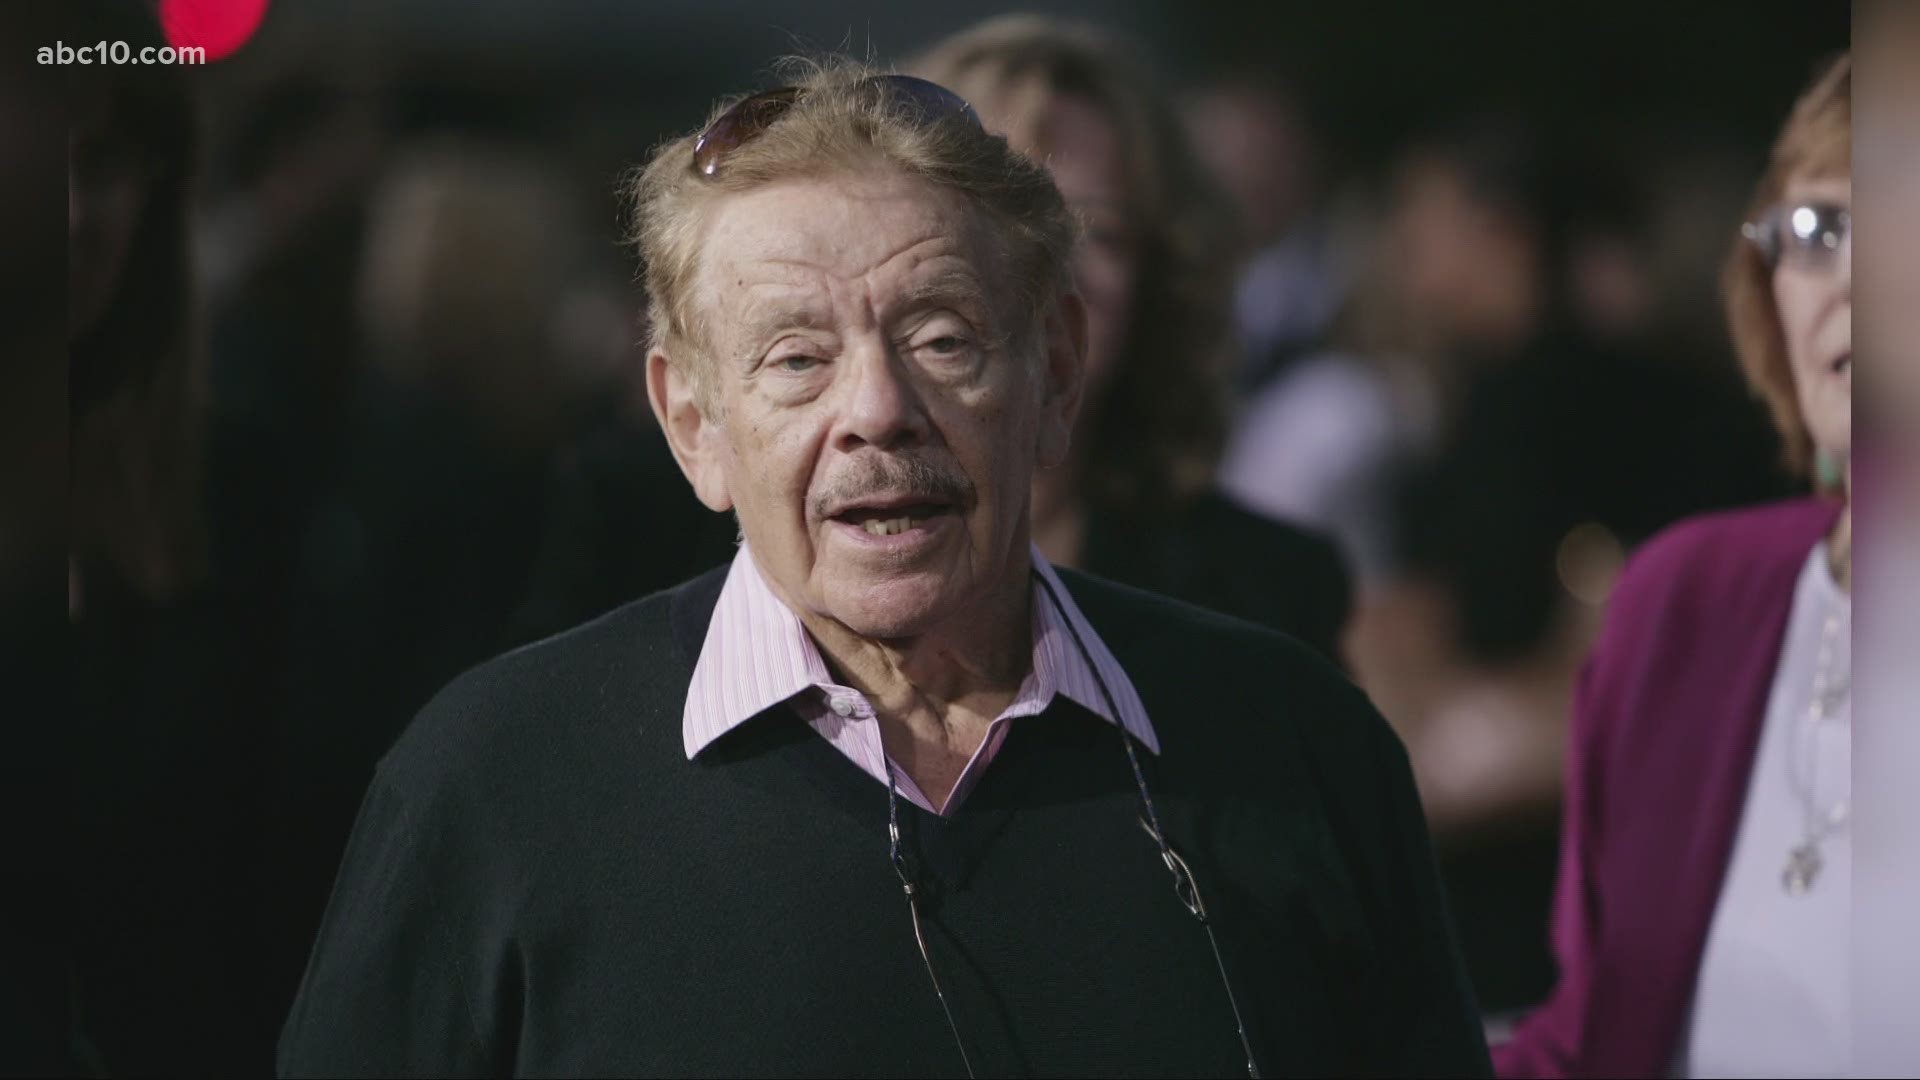 In today's entertainment news roundup, comedy legend Jerry Stiller has passed away at the ages of 92 and Vin Diesel's new film "Bloodshot" is out on DVD.